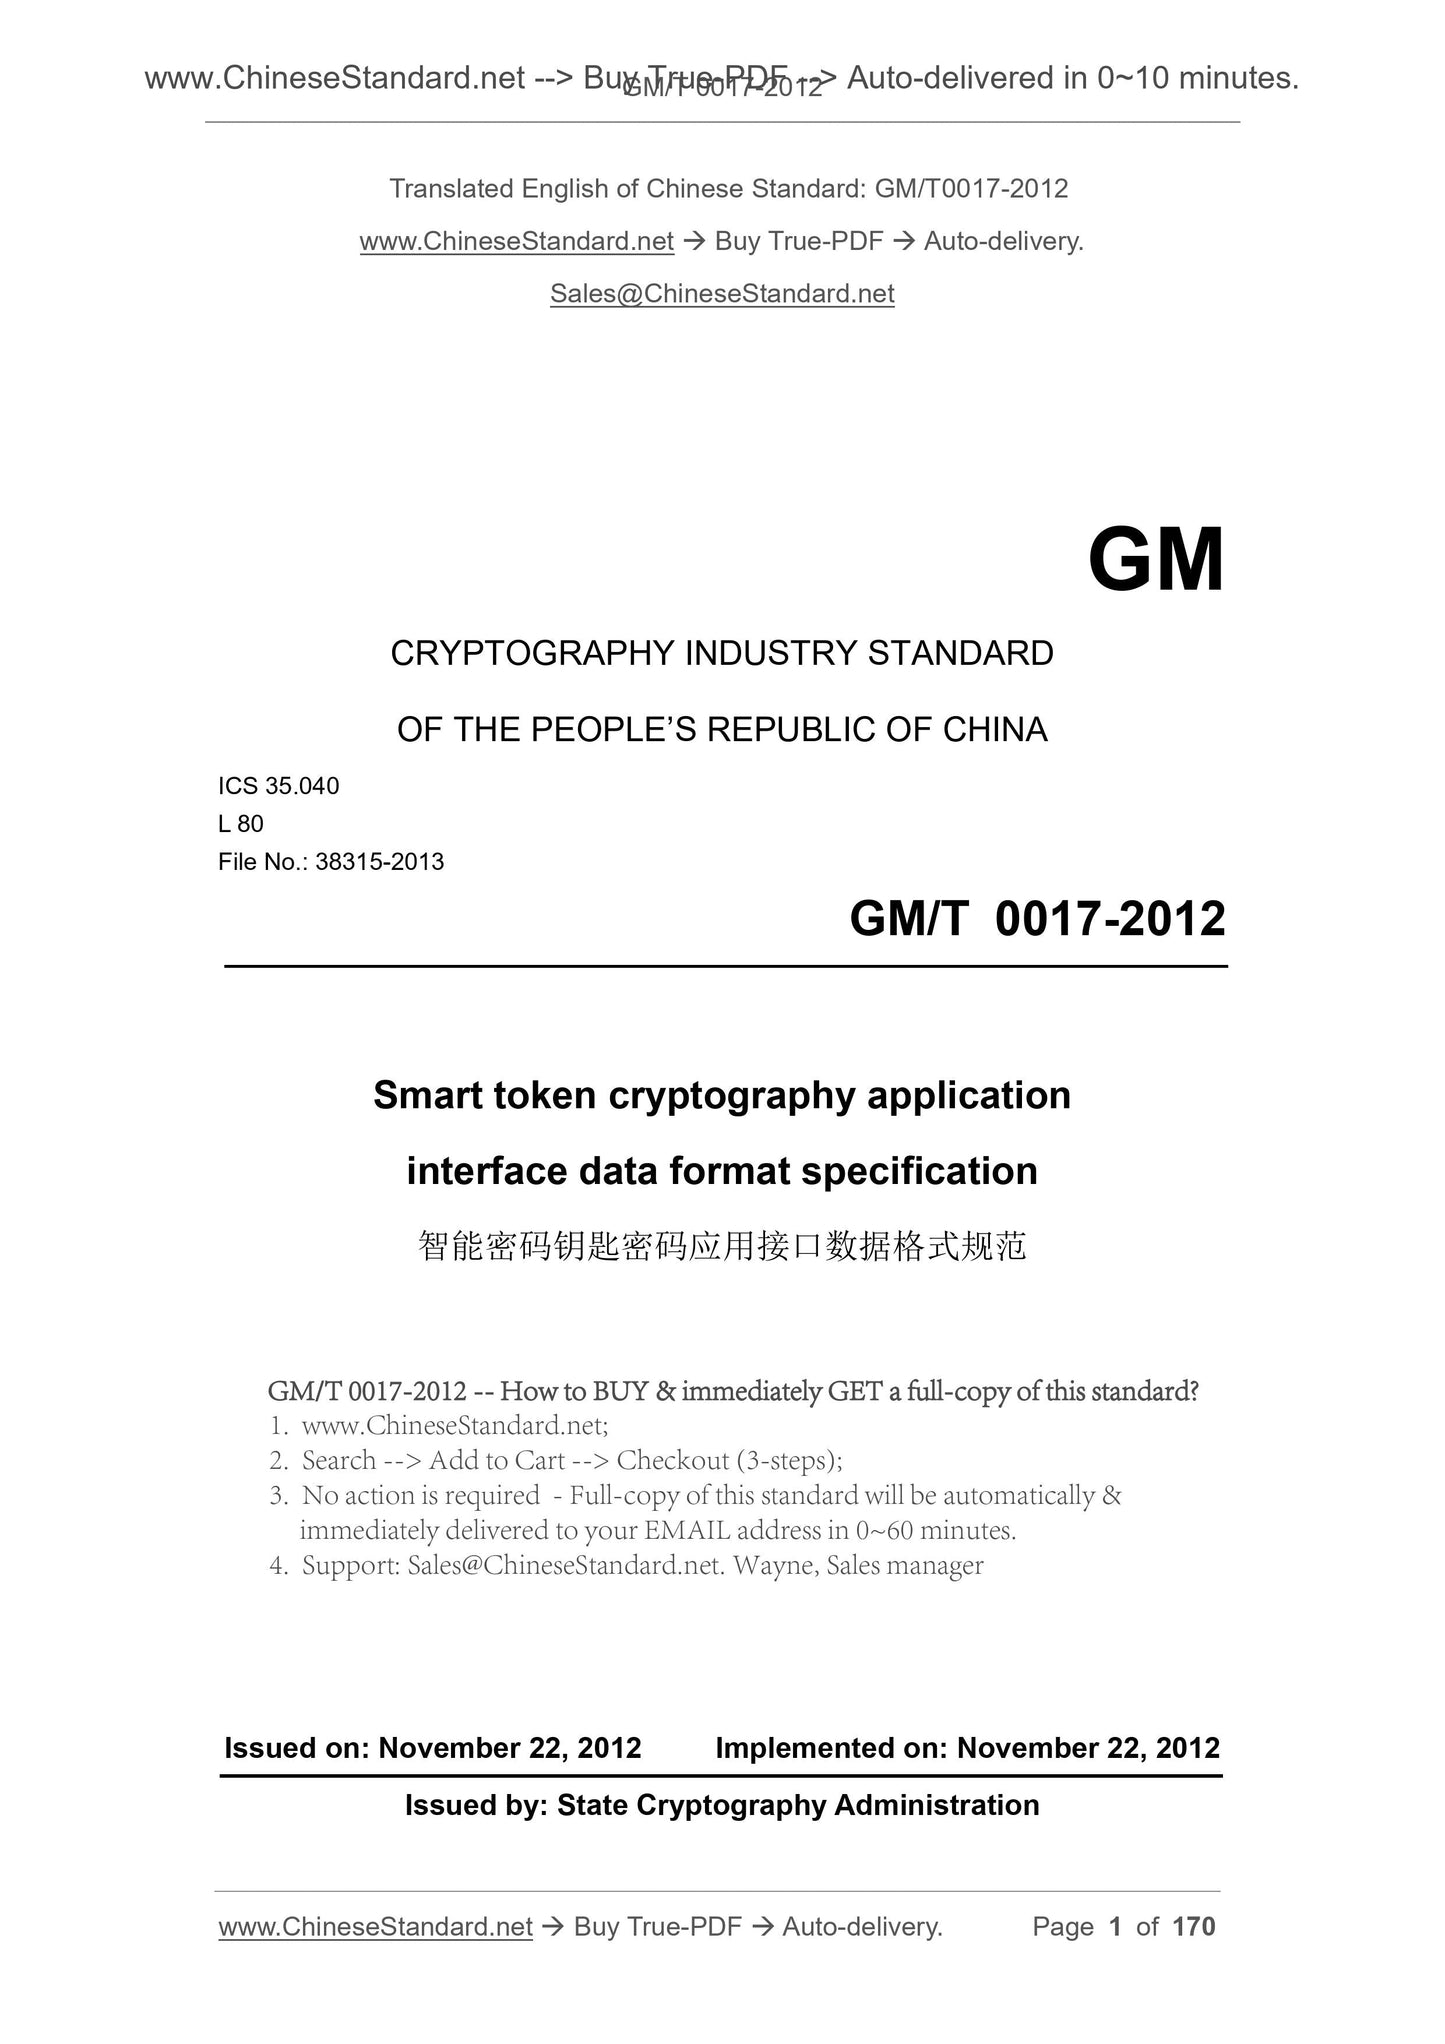 GM/T 0017-2012 Page 1